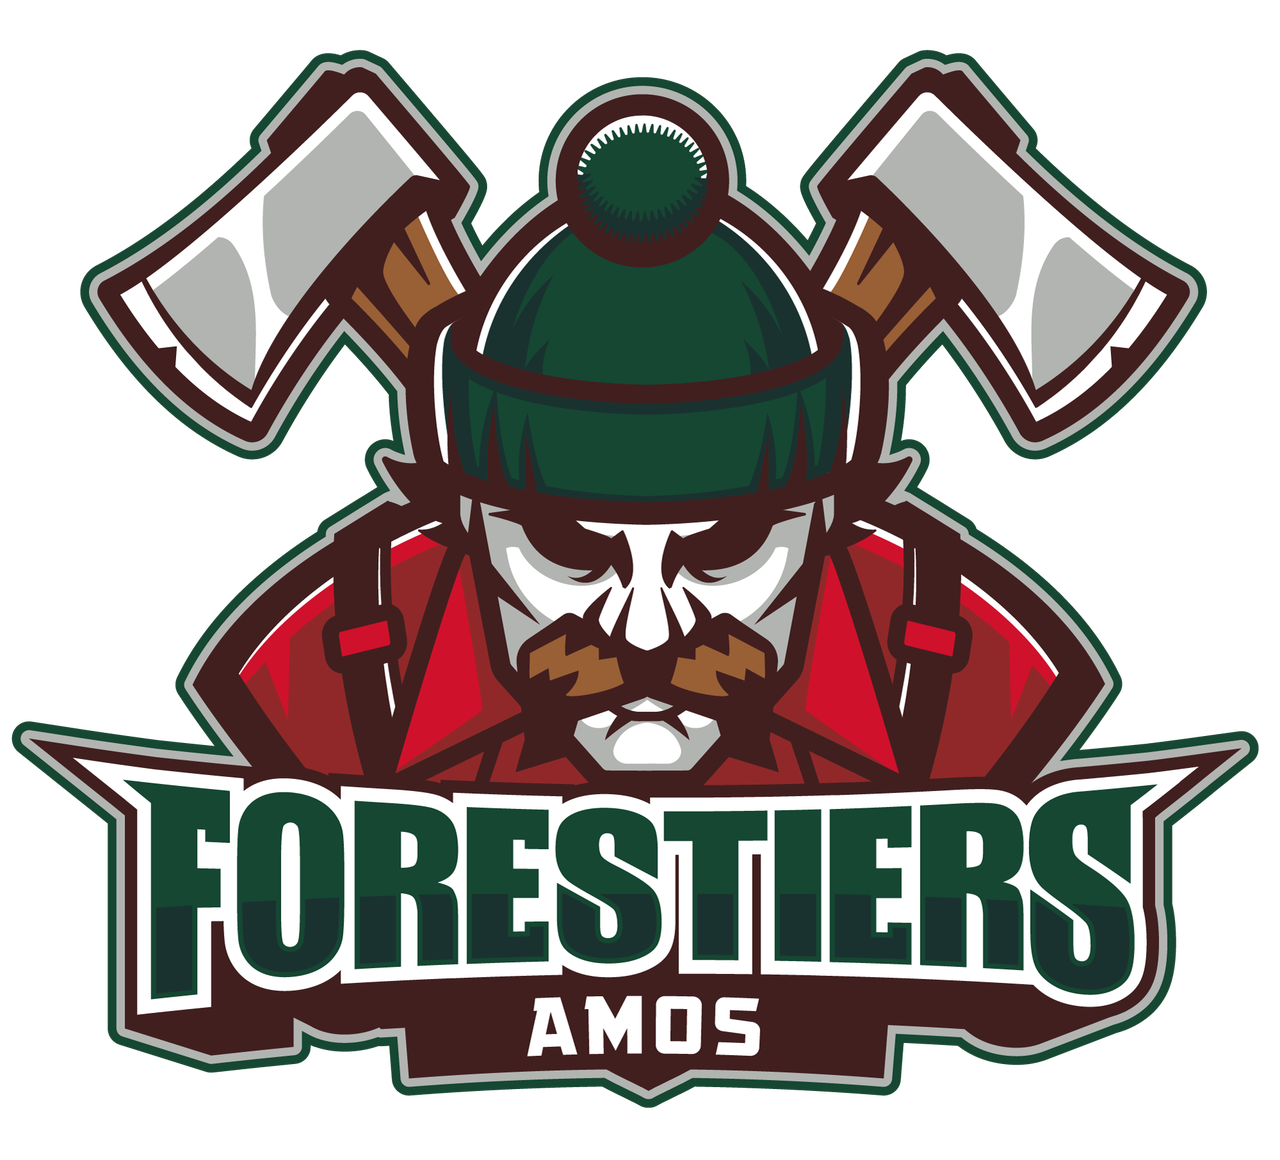 Forestiers Amos